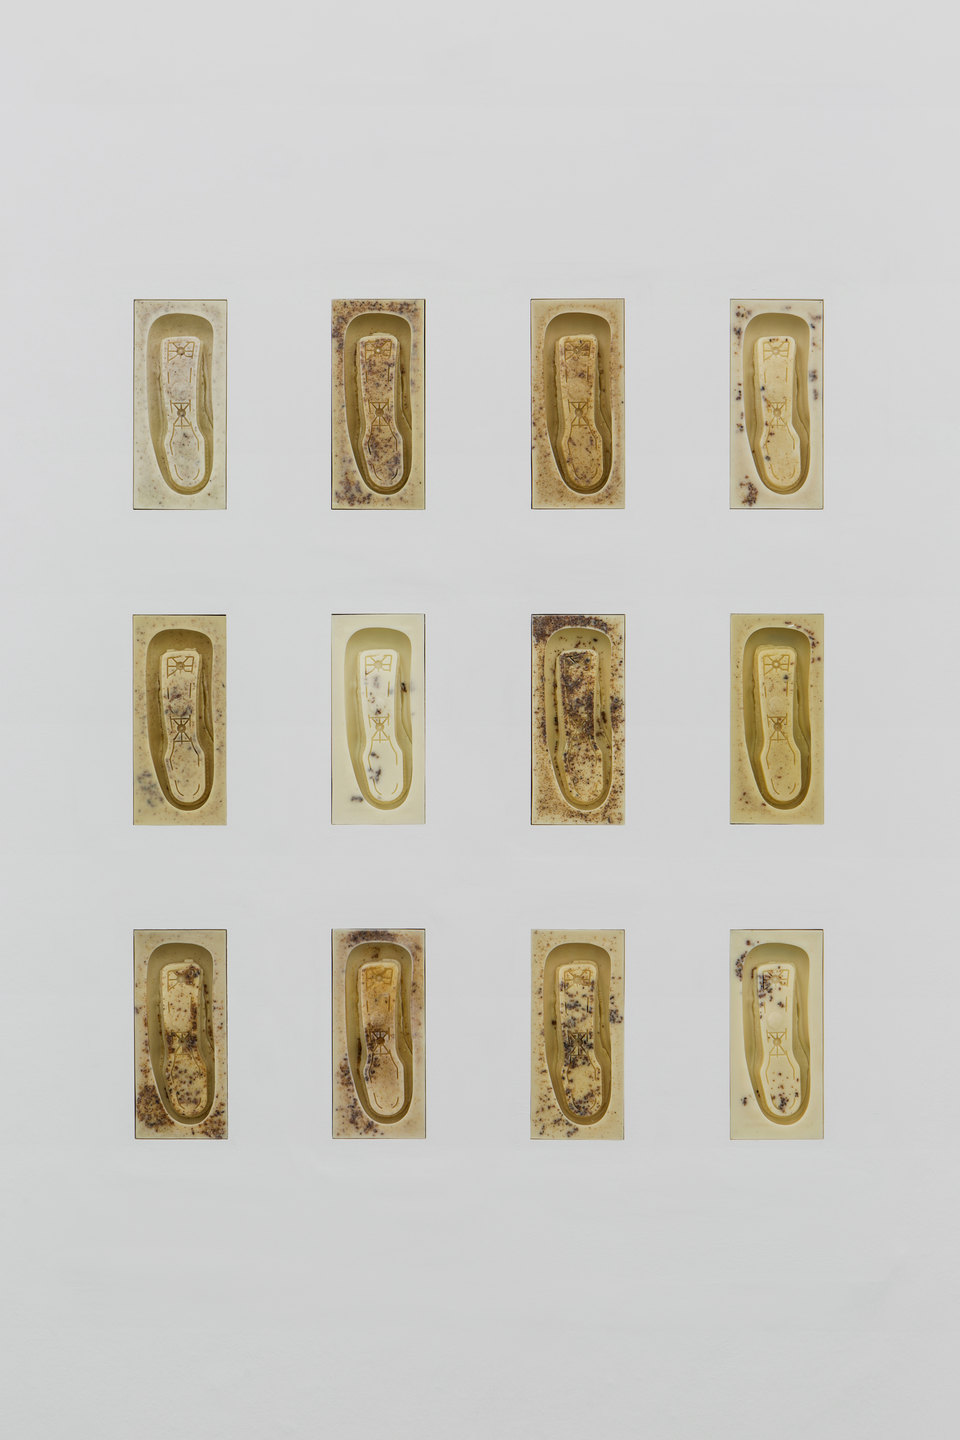 Patricia L. Boyd, 'Aeron Armrest I-XII', 2019, Used restaurant grease, wax, damar resin 31.1 x 13.7cm each, Cell Project Space